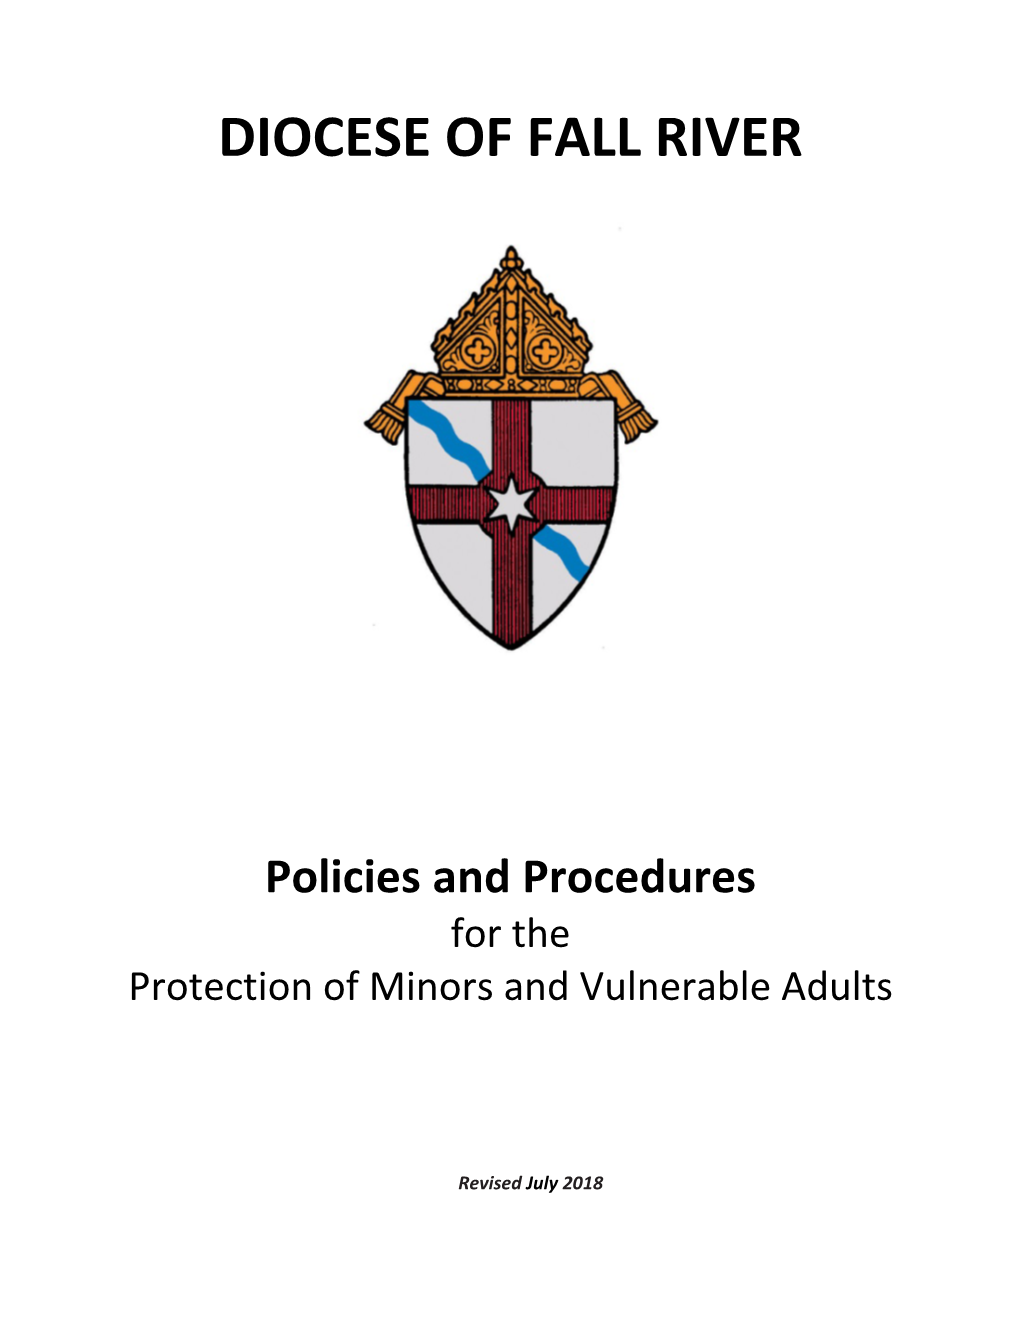 DIOCESE of FALL RIVER Policies and Procedures